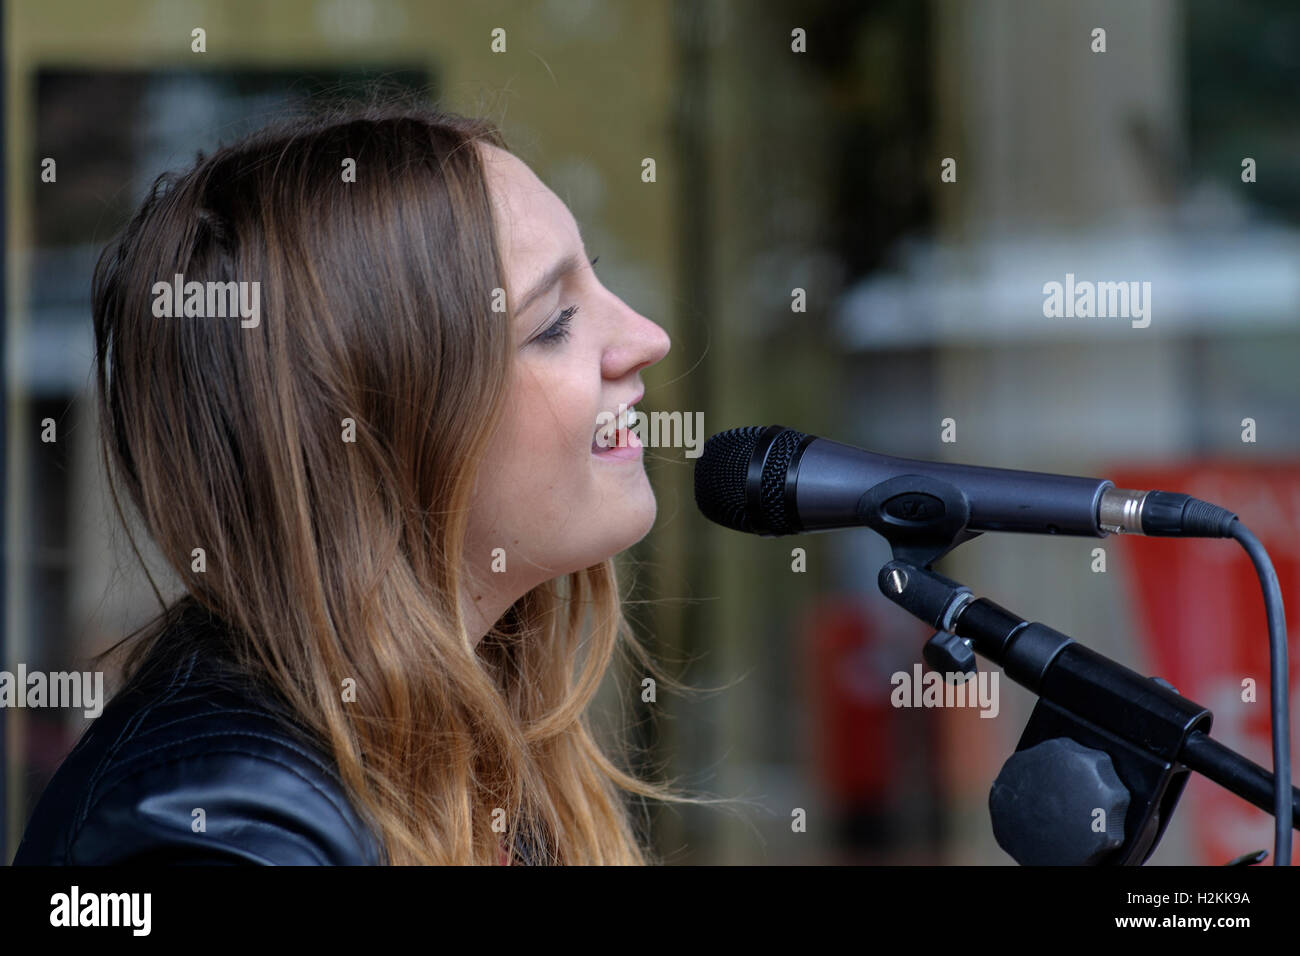 street busker performing in shopping center in england uk Stock Photo